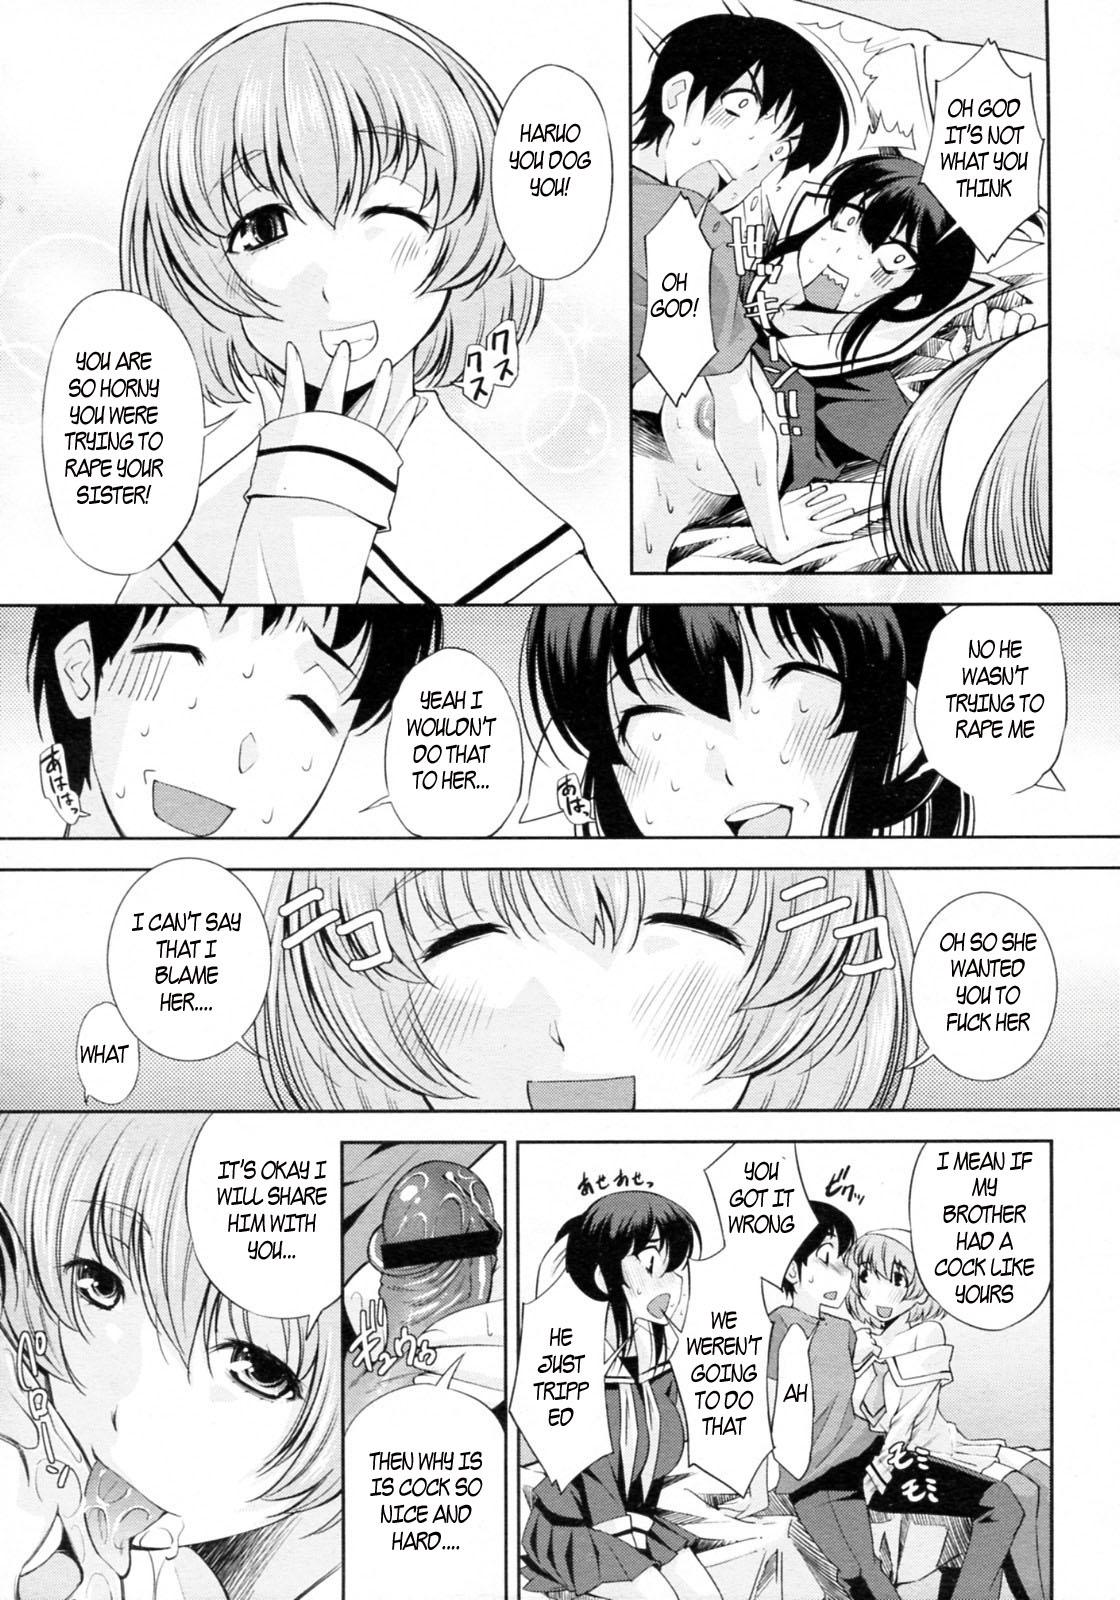 Ano Sister Switch Handjobs - Page 11